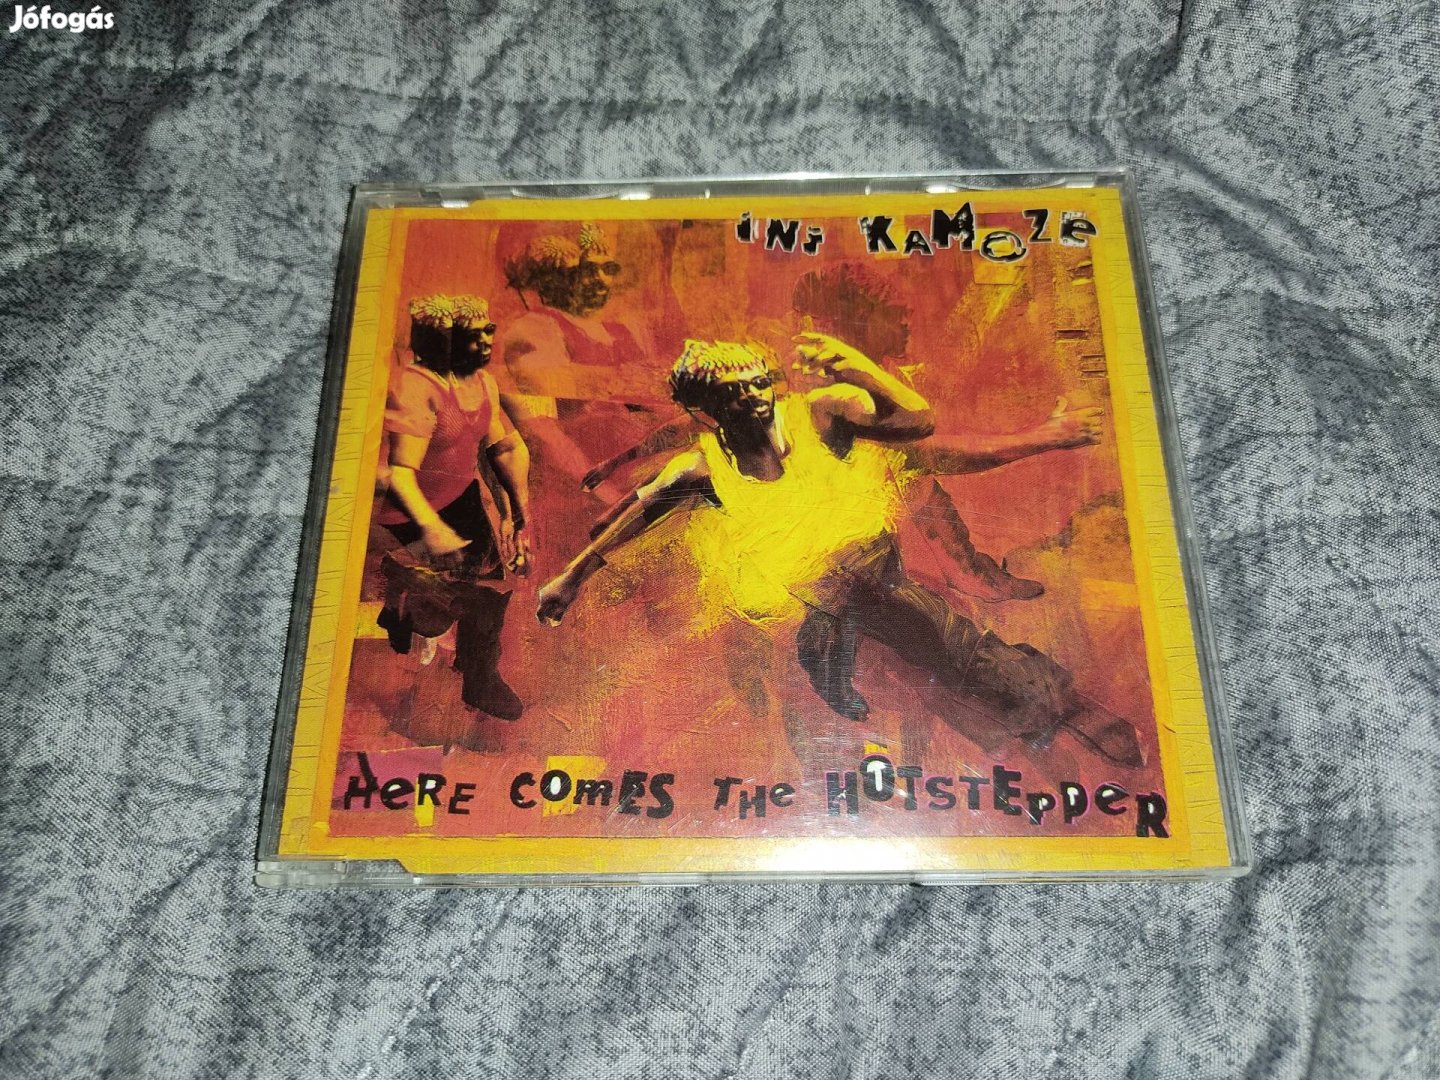 Ini Kamoze - Here Comes The Hotstepper Maxi CD 